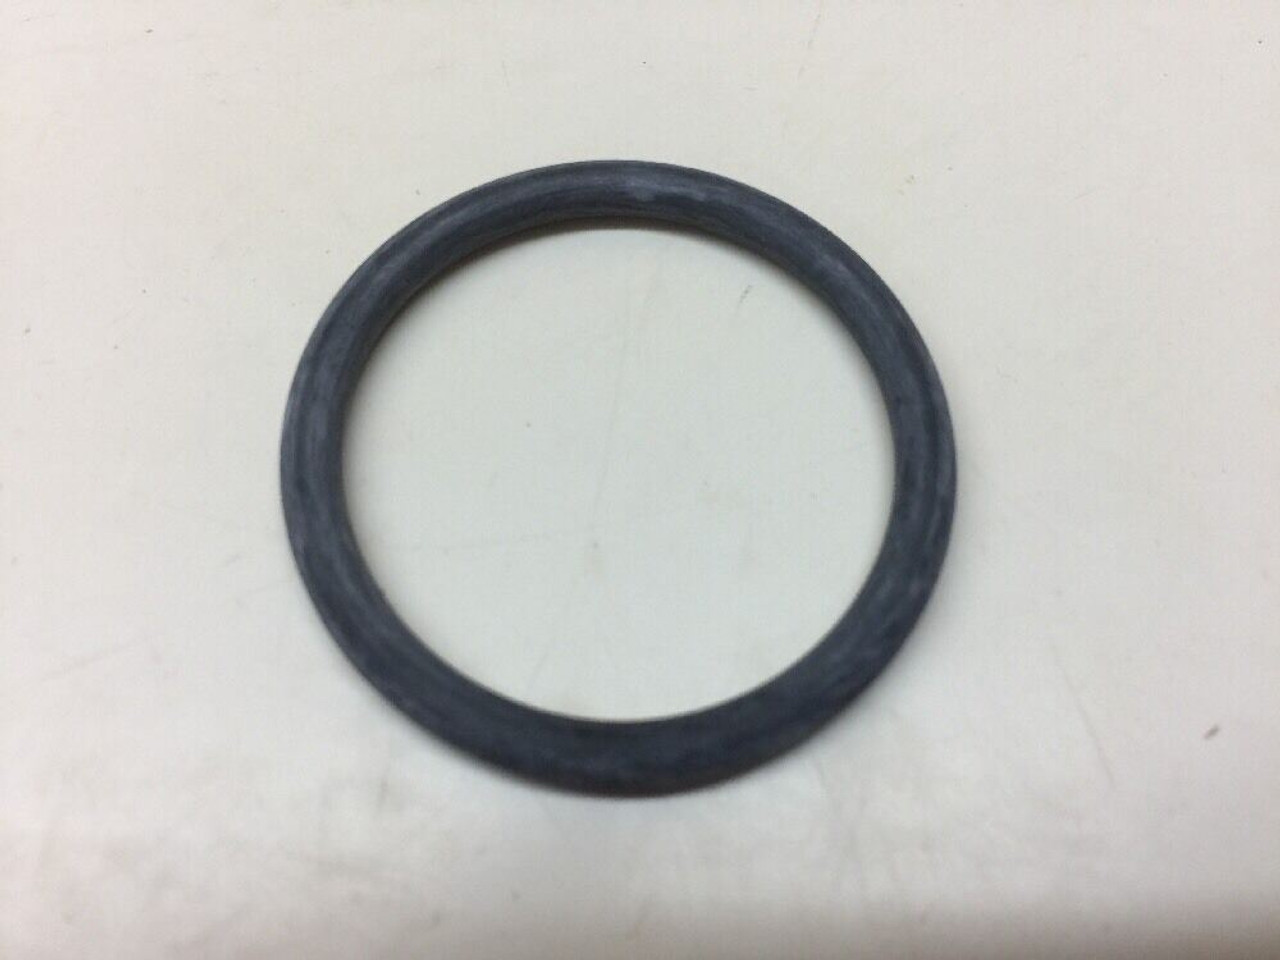 Rubber Packing Seal MS28775-219 Parker-Hannifin O-Ring Seal Lot of 20